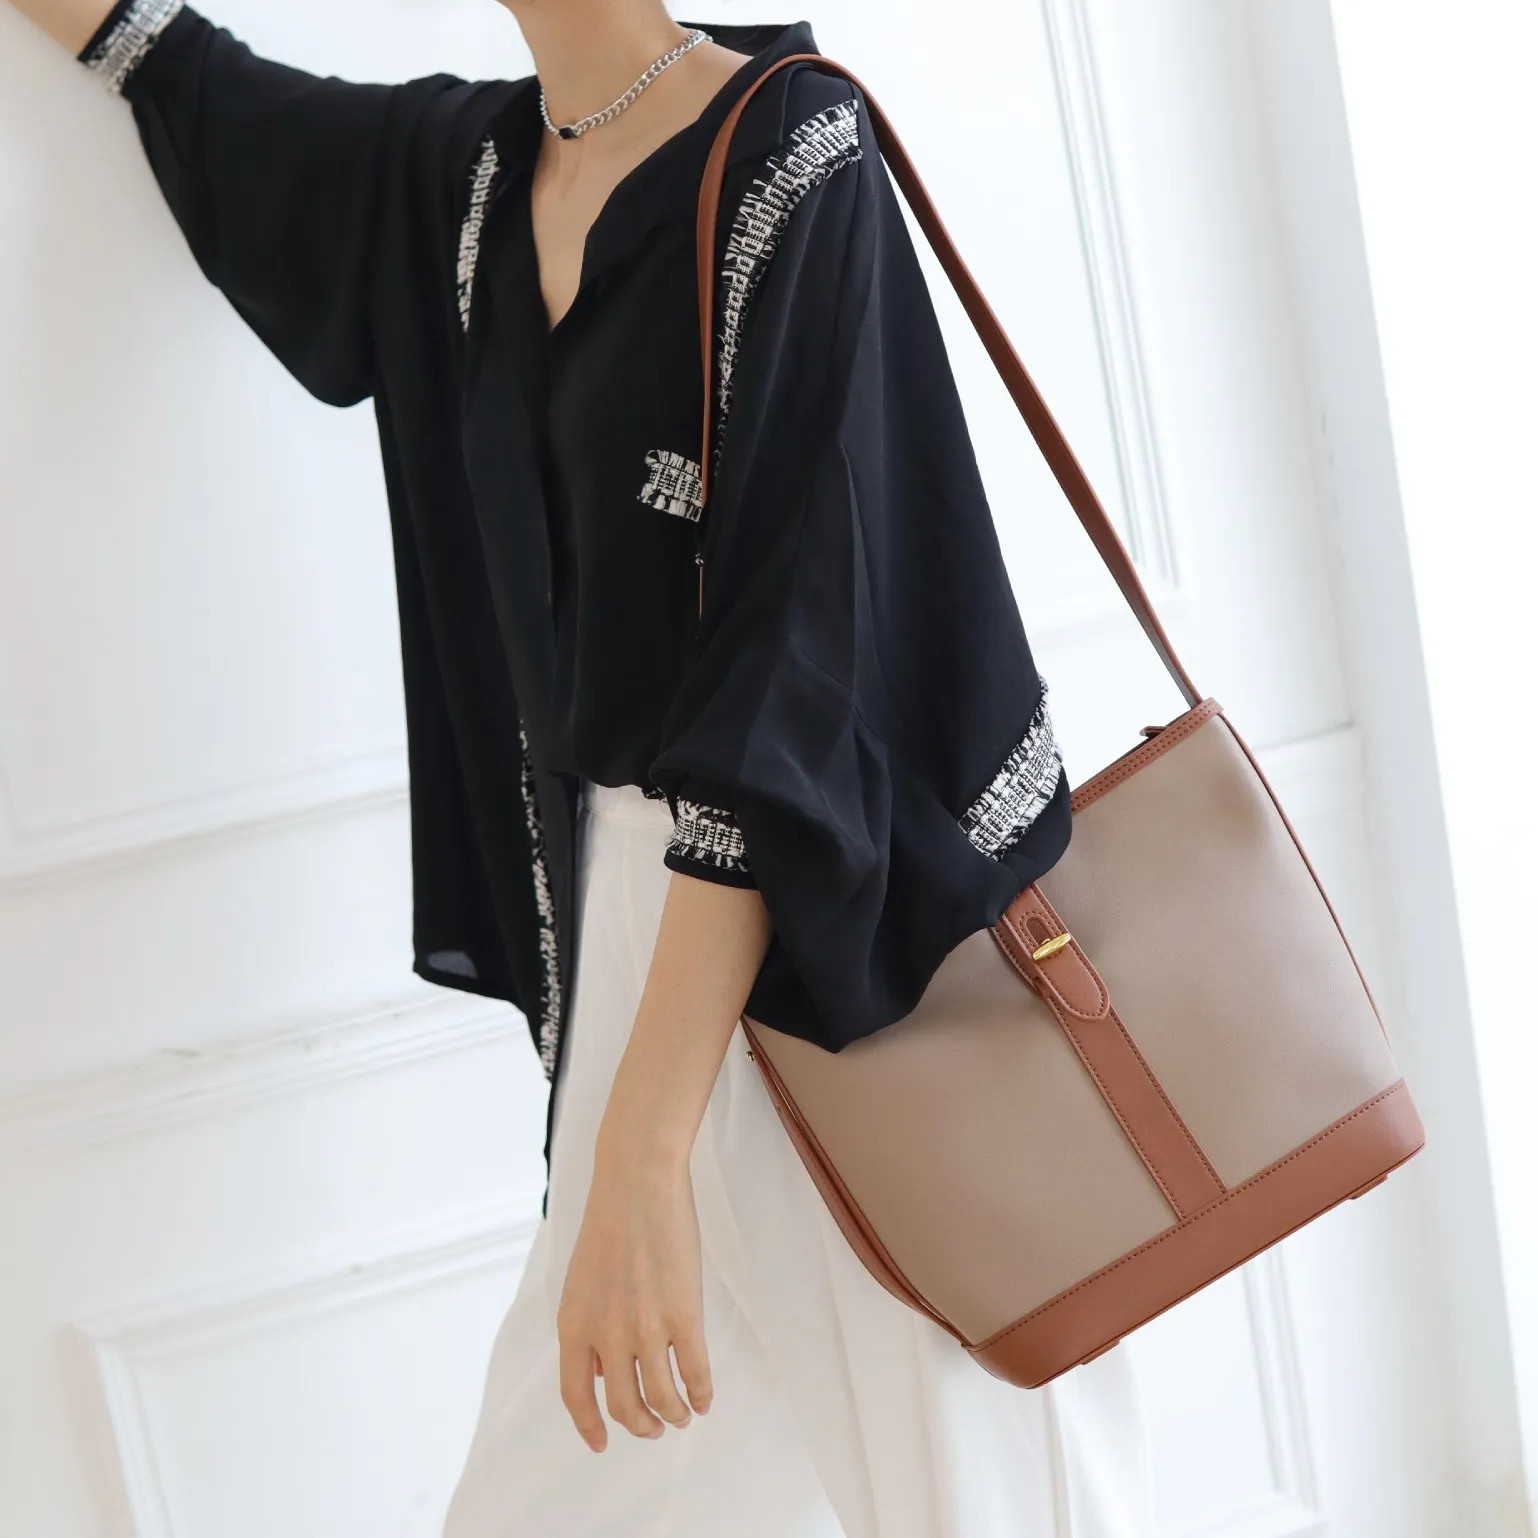 women leather handbags and purses with candy ring simple cross body bamboo bags women handbag